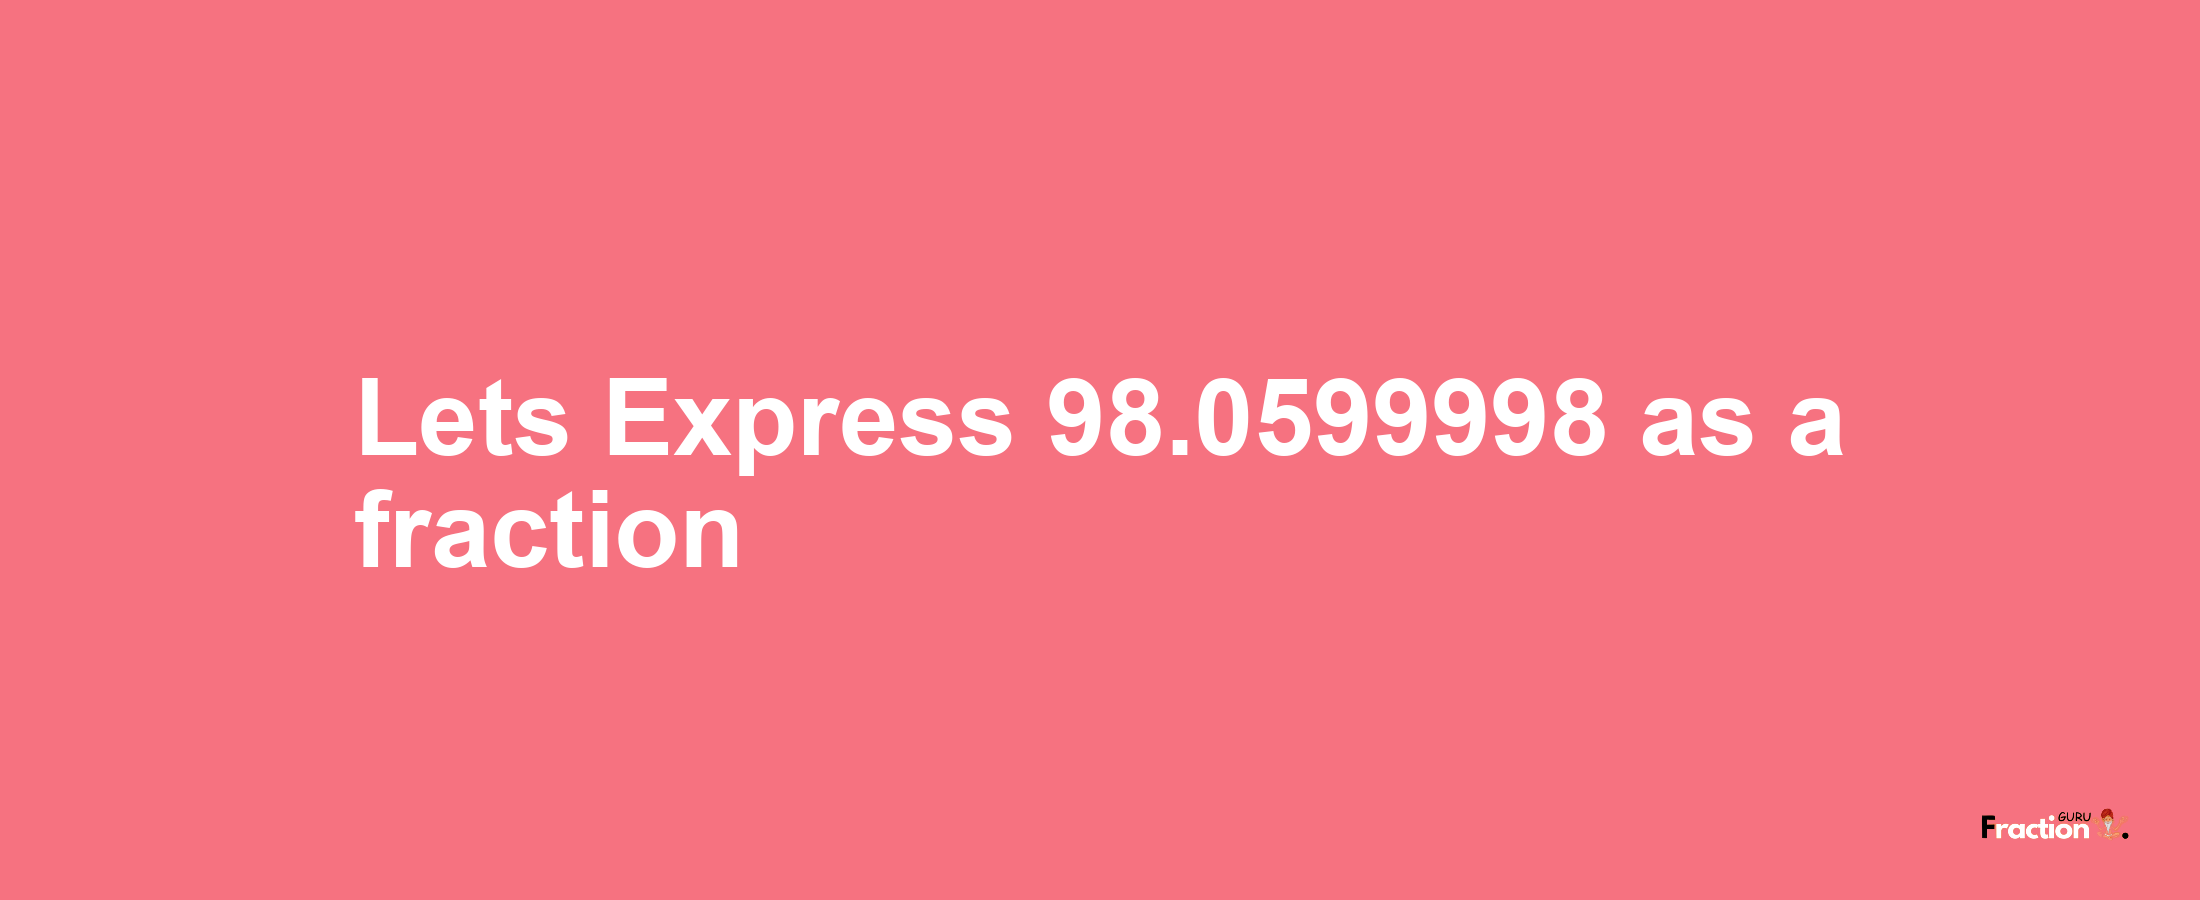 Lets Express 98.0599998 as afraction